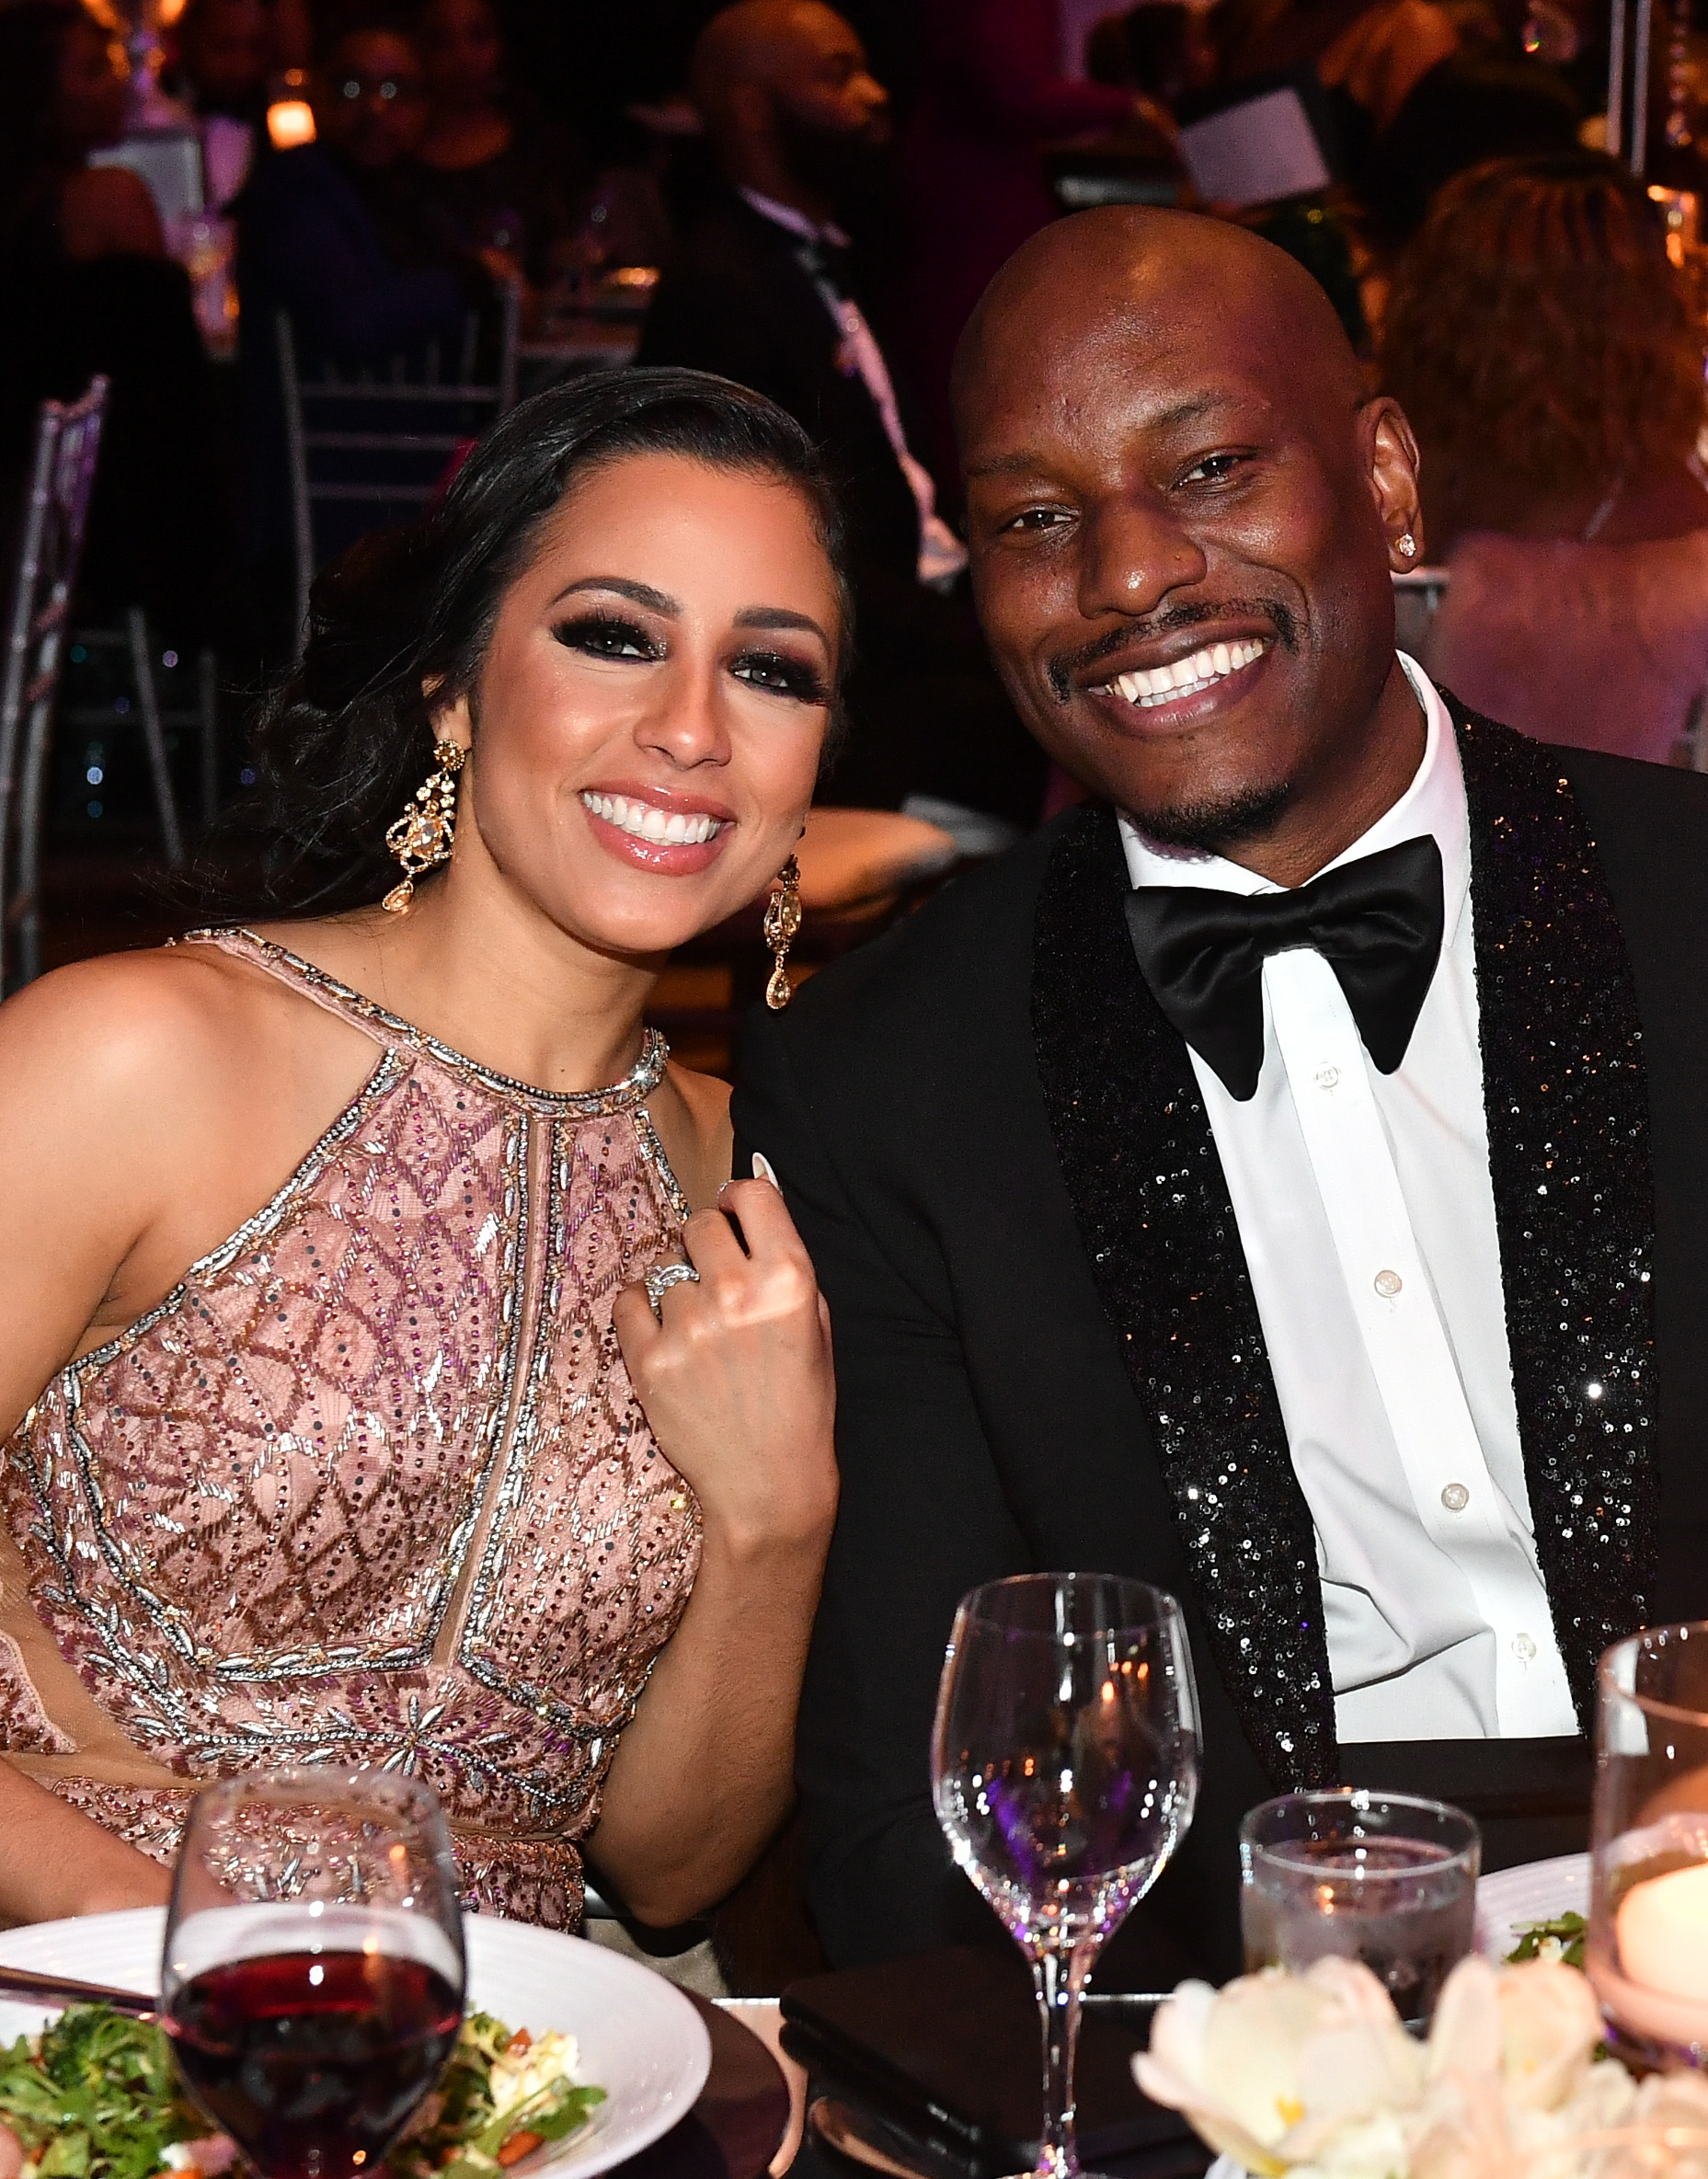 Messy Divorces: Tyrese Files Motion To Block Estranged Wife’s Request He Pay For Her Three Divorce Attorneys